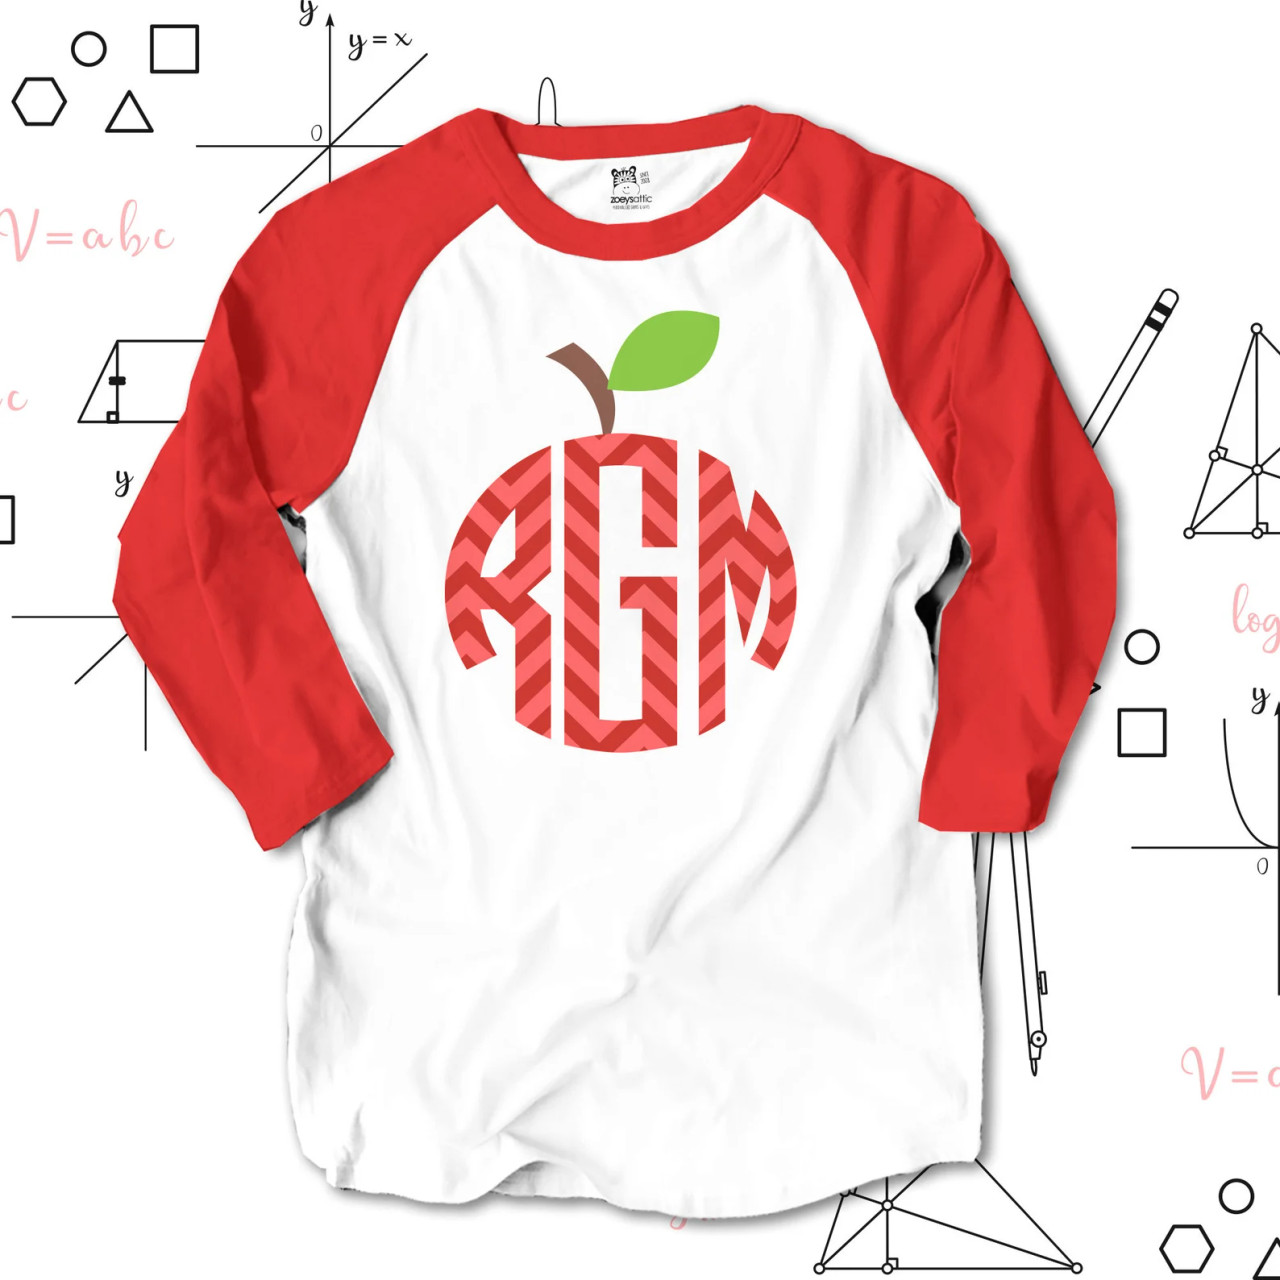 Custom Christmas Monogram Comfort Colors Pocket Tees | Refinery Number One, Inc | Graphic Apparel |  Boutiques